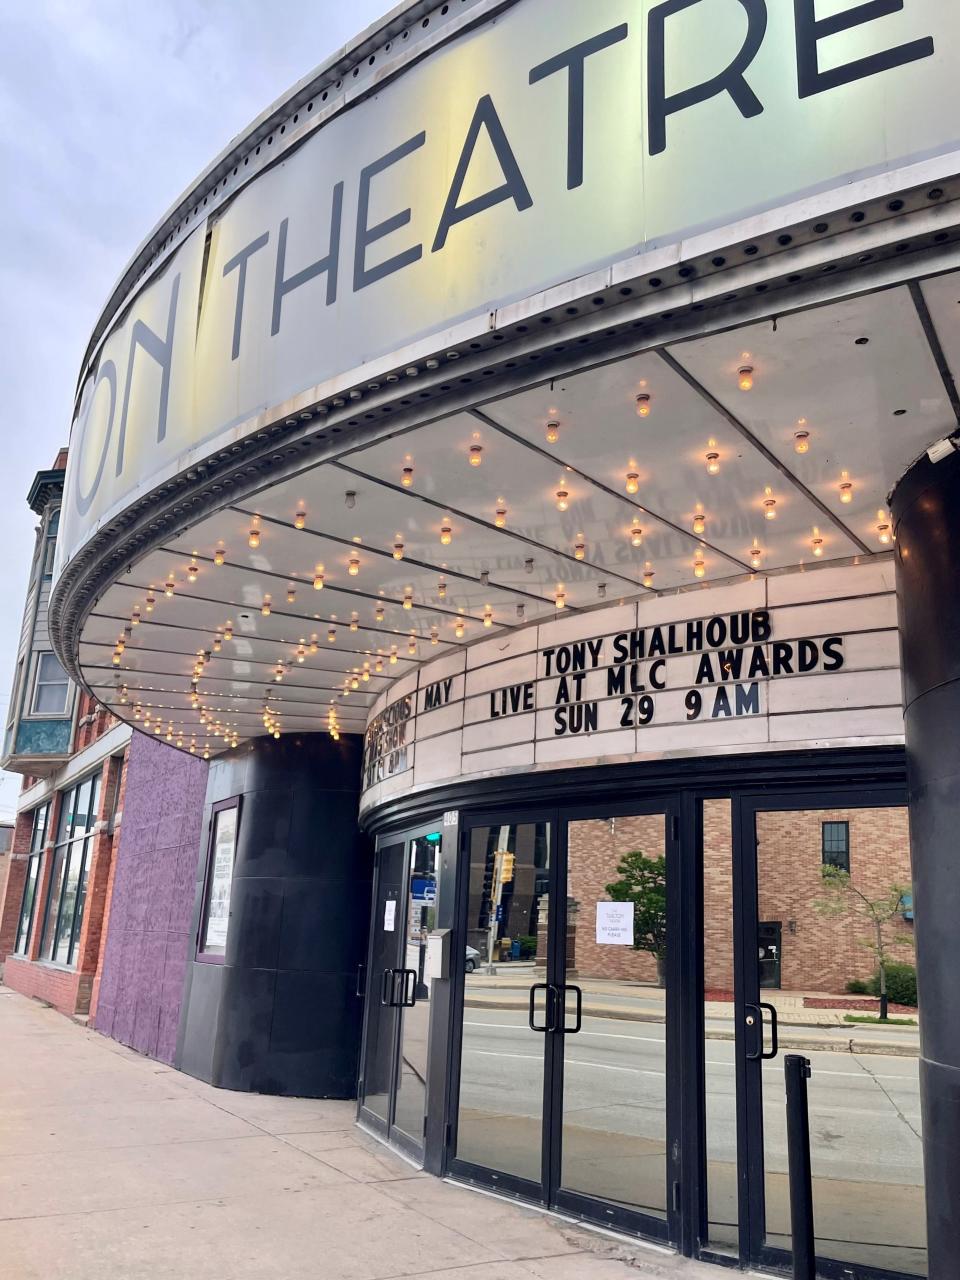 The Tarlton Theatre in downtown Green Bay welcomed actor Tony Shalhoub on Sunday afternoon for an appearance as part of the MLC Awards. The Green Bay native is a producer for one of the short films screened at the event. "2 Timers" stars his former "Wings" co-star Steven Weber.